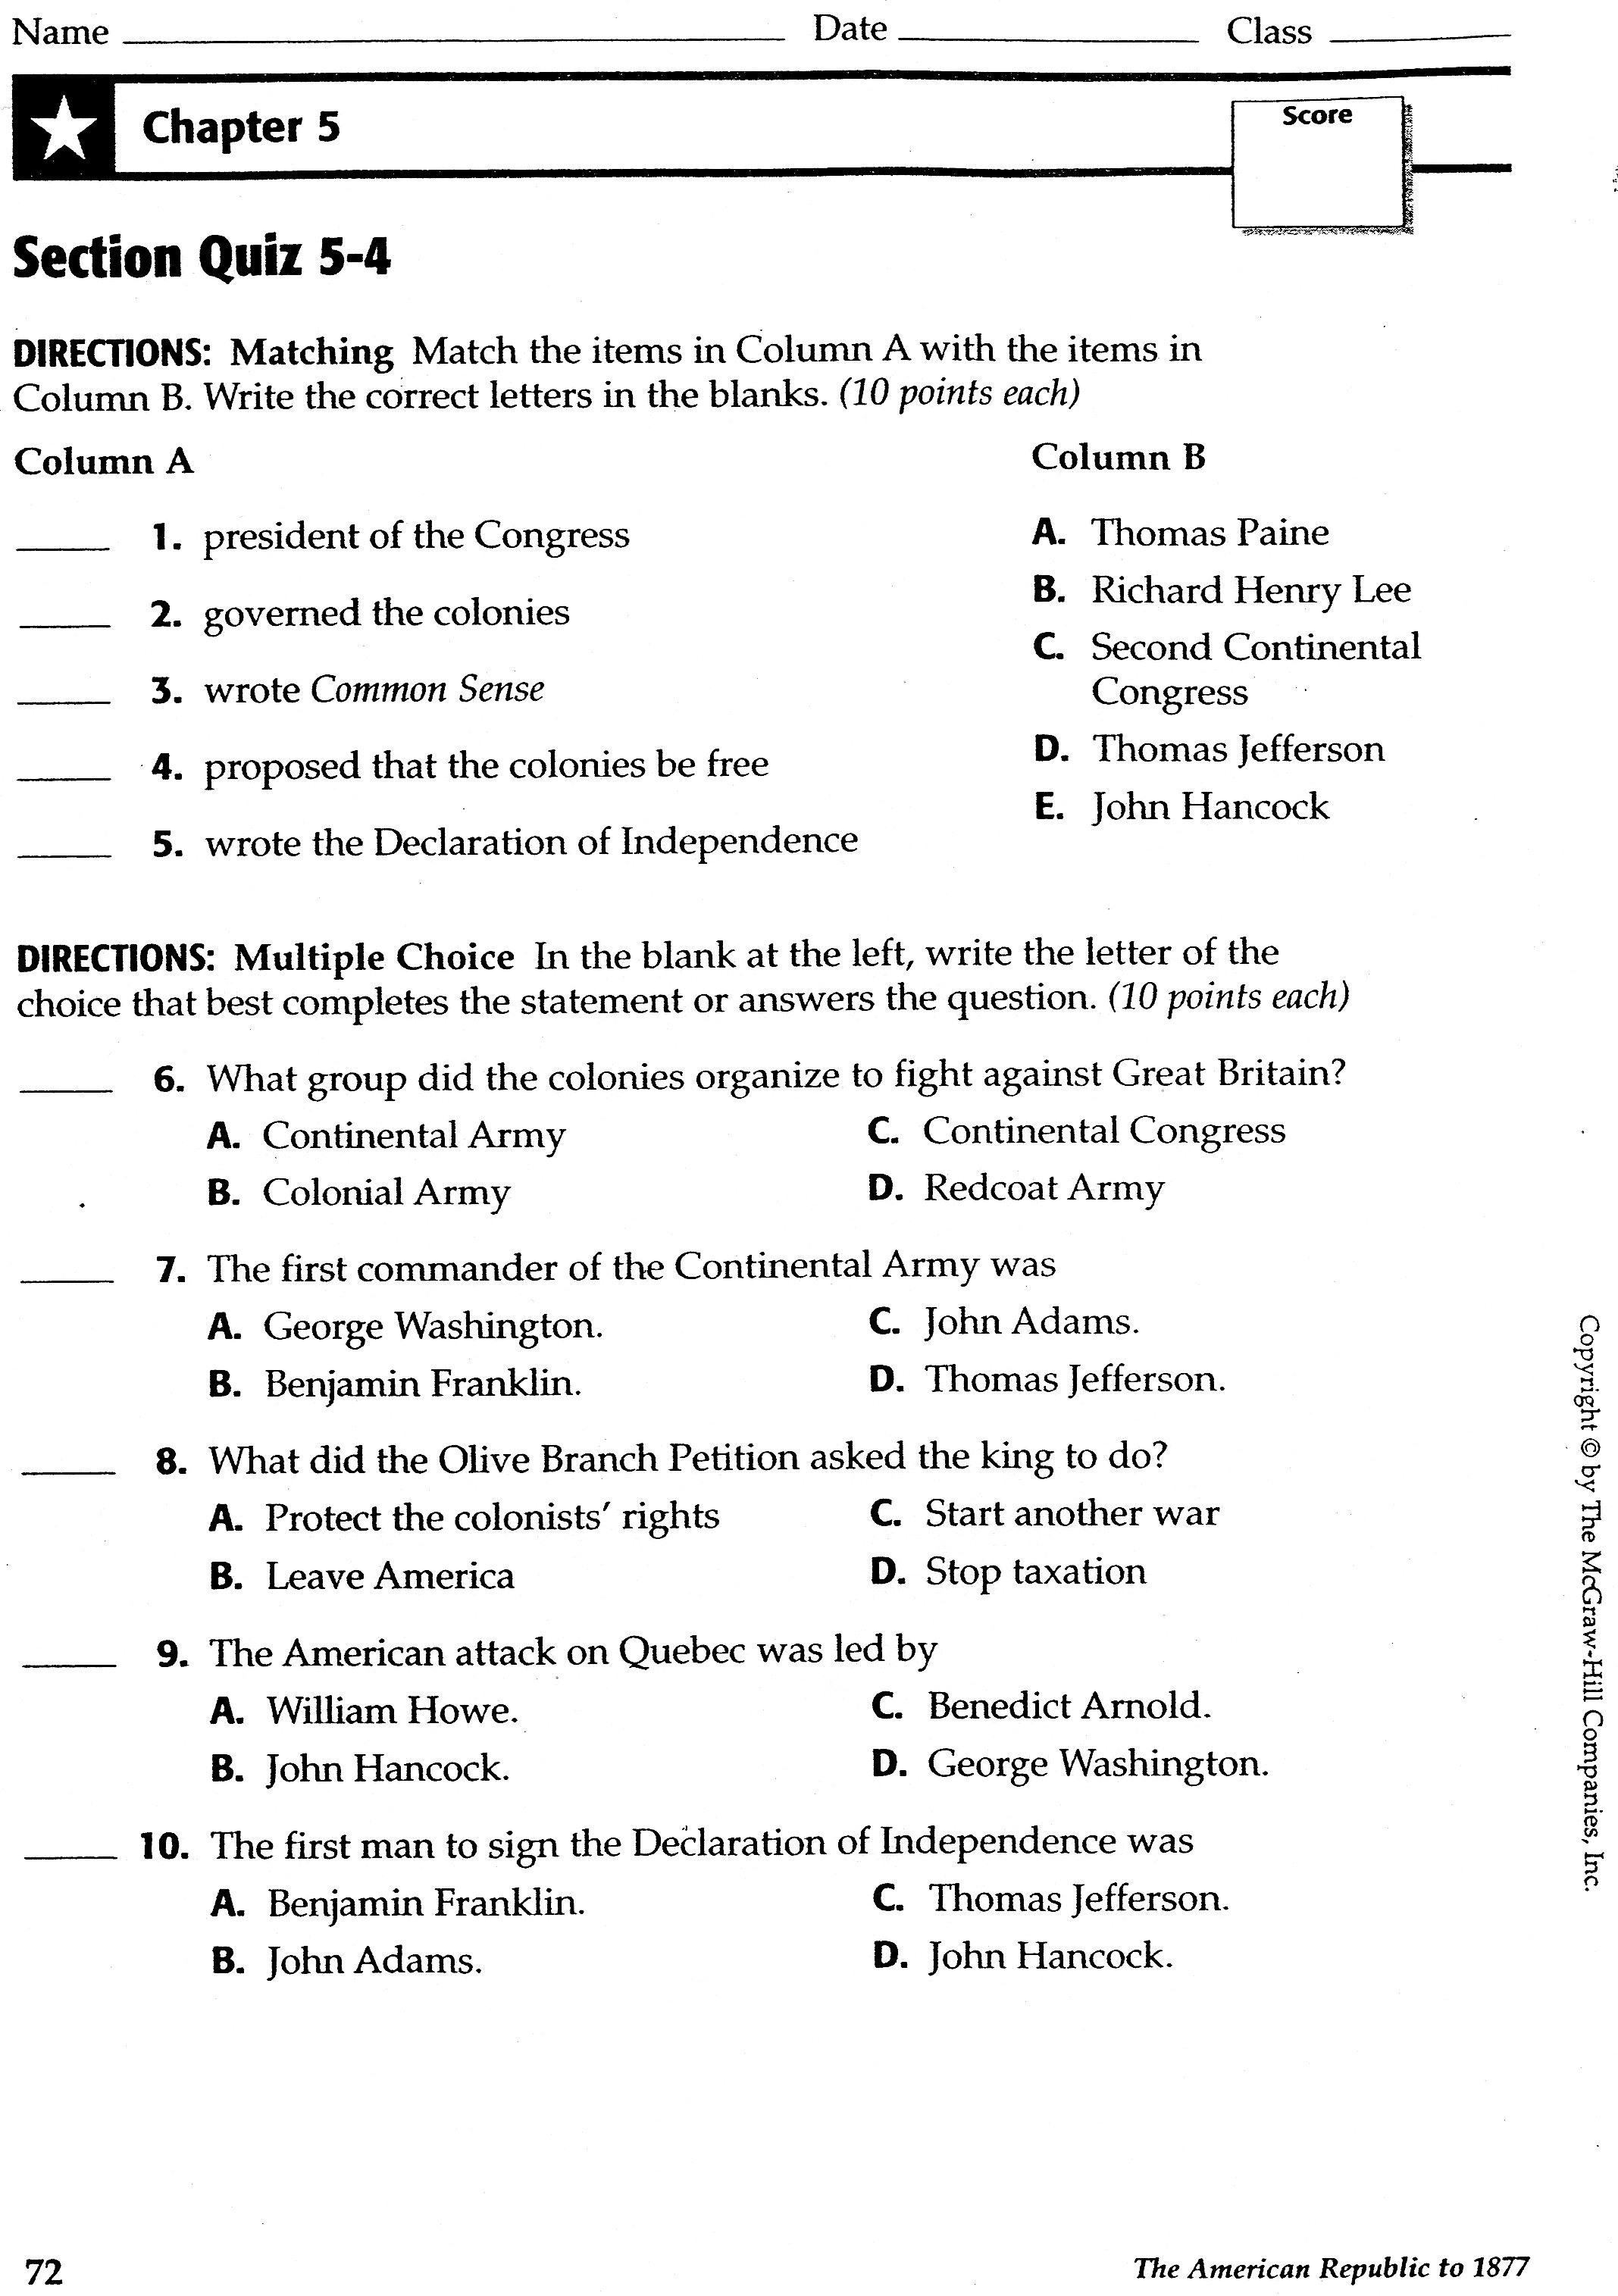 chapter 6 section 1 answer key